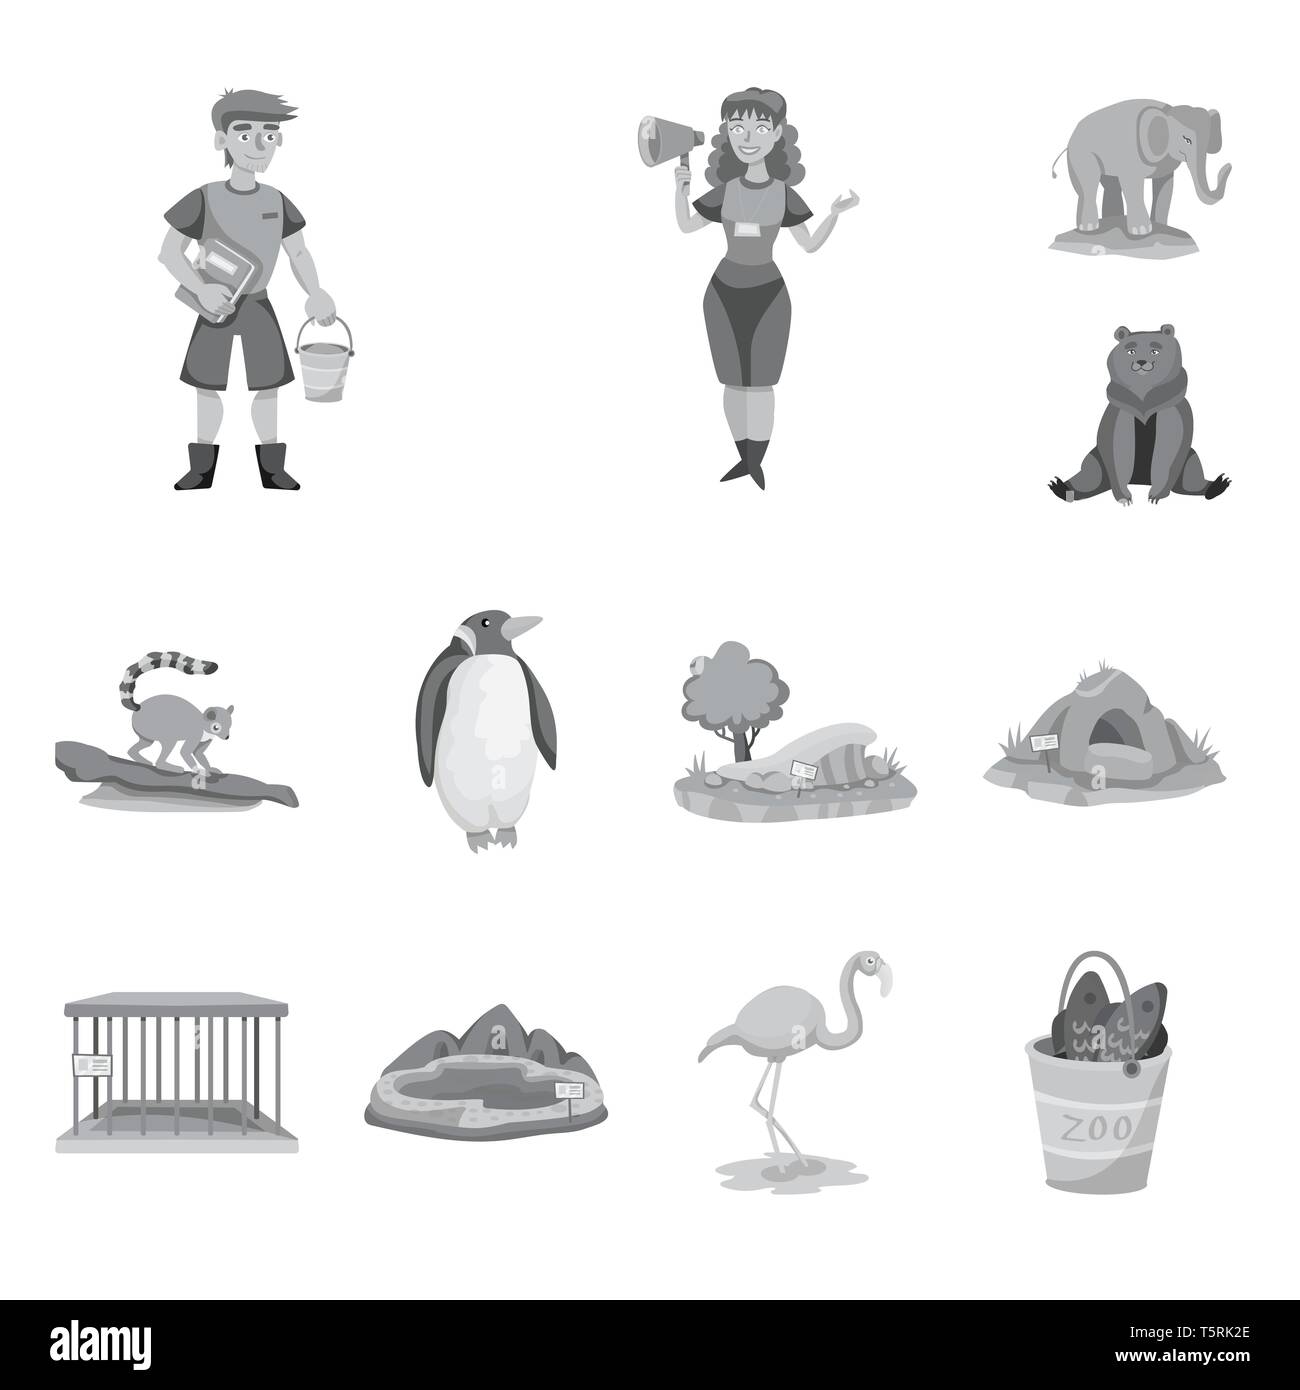 zookeeper,elephant,bear,lemur,penguin,trees,cave,cell,lake,flamingo,bucket,man,woman,cute,brown,monkey,white,sand,empty,pool,pink,fish,utensil,jungle,big,sloth,christmas,landscape,zoo,park,safari,animal,nature,fun,fauna,entertainment,forest,flora,set,vector,icon,illustration,isolated,collection,design,element,graphic,sign,mono,gray Vector Vectors , Stock Vector